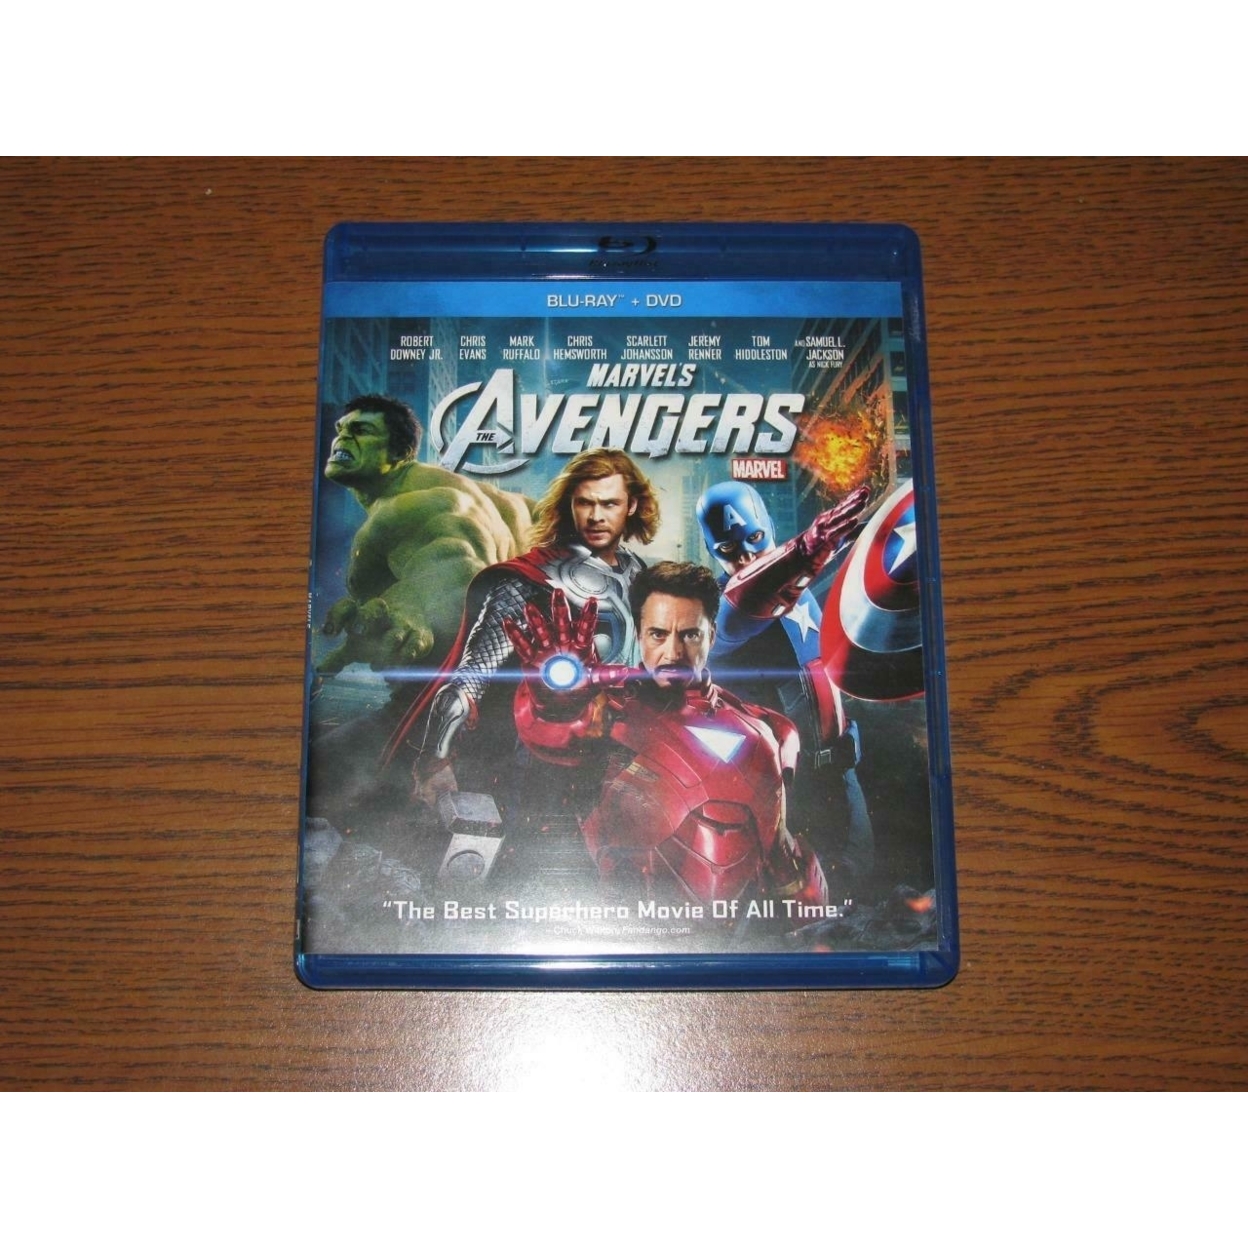 Marvel's The Avengers (Blu-ray + DVD) - image 1 of 2